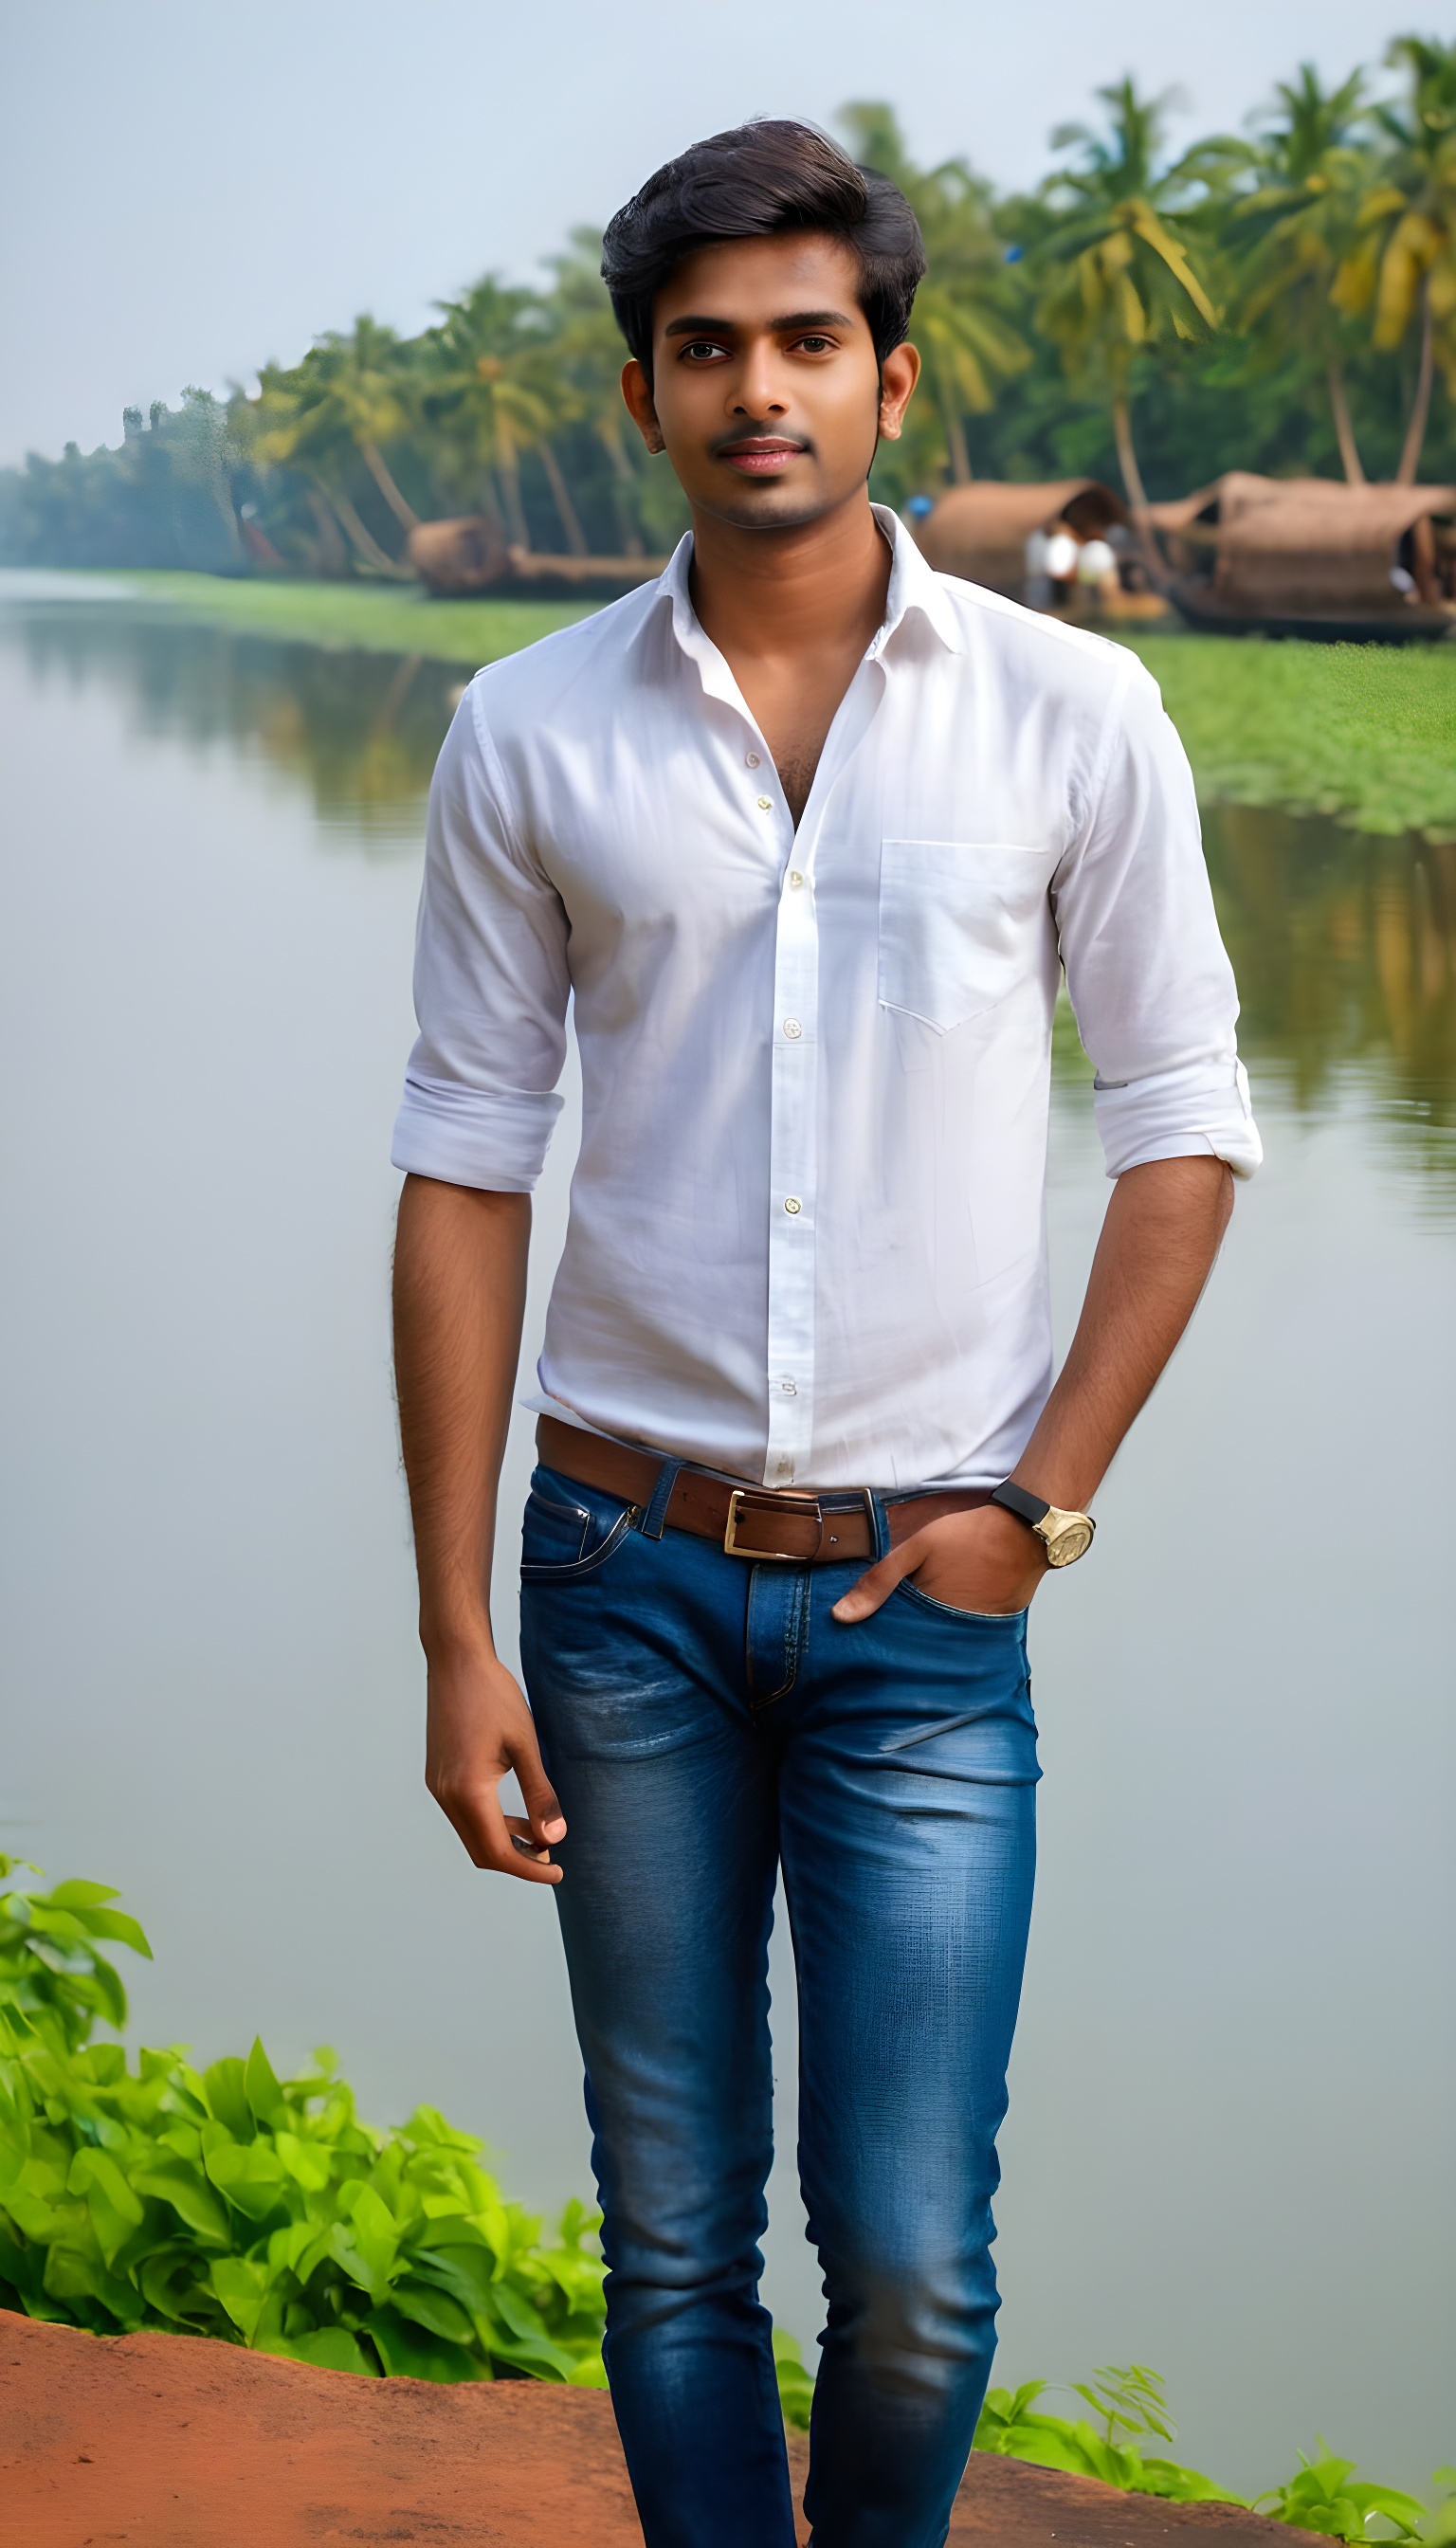 Indian man dressed in casual Button-up white shirt with jeans and enchanting captivating eyes